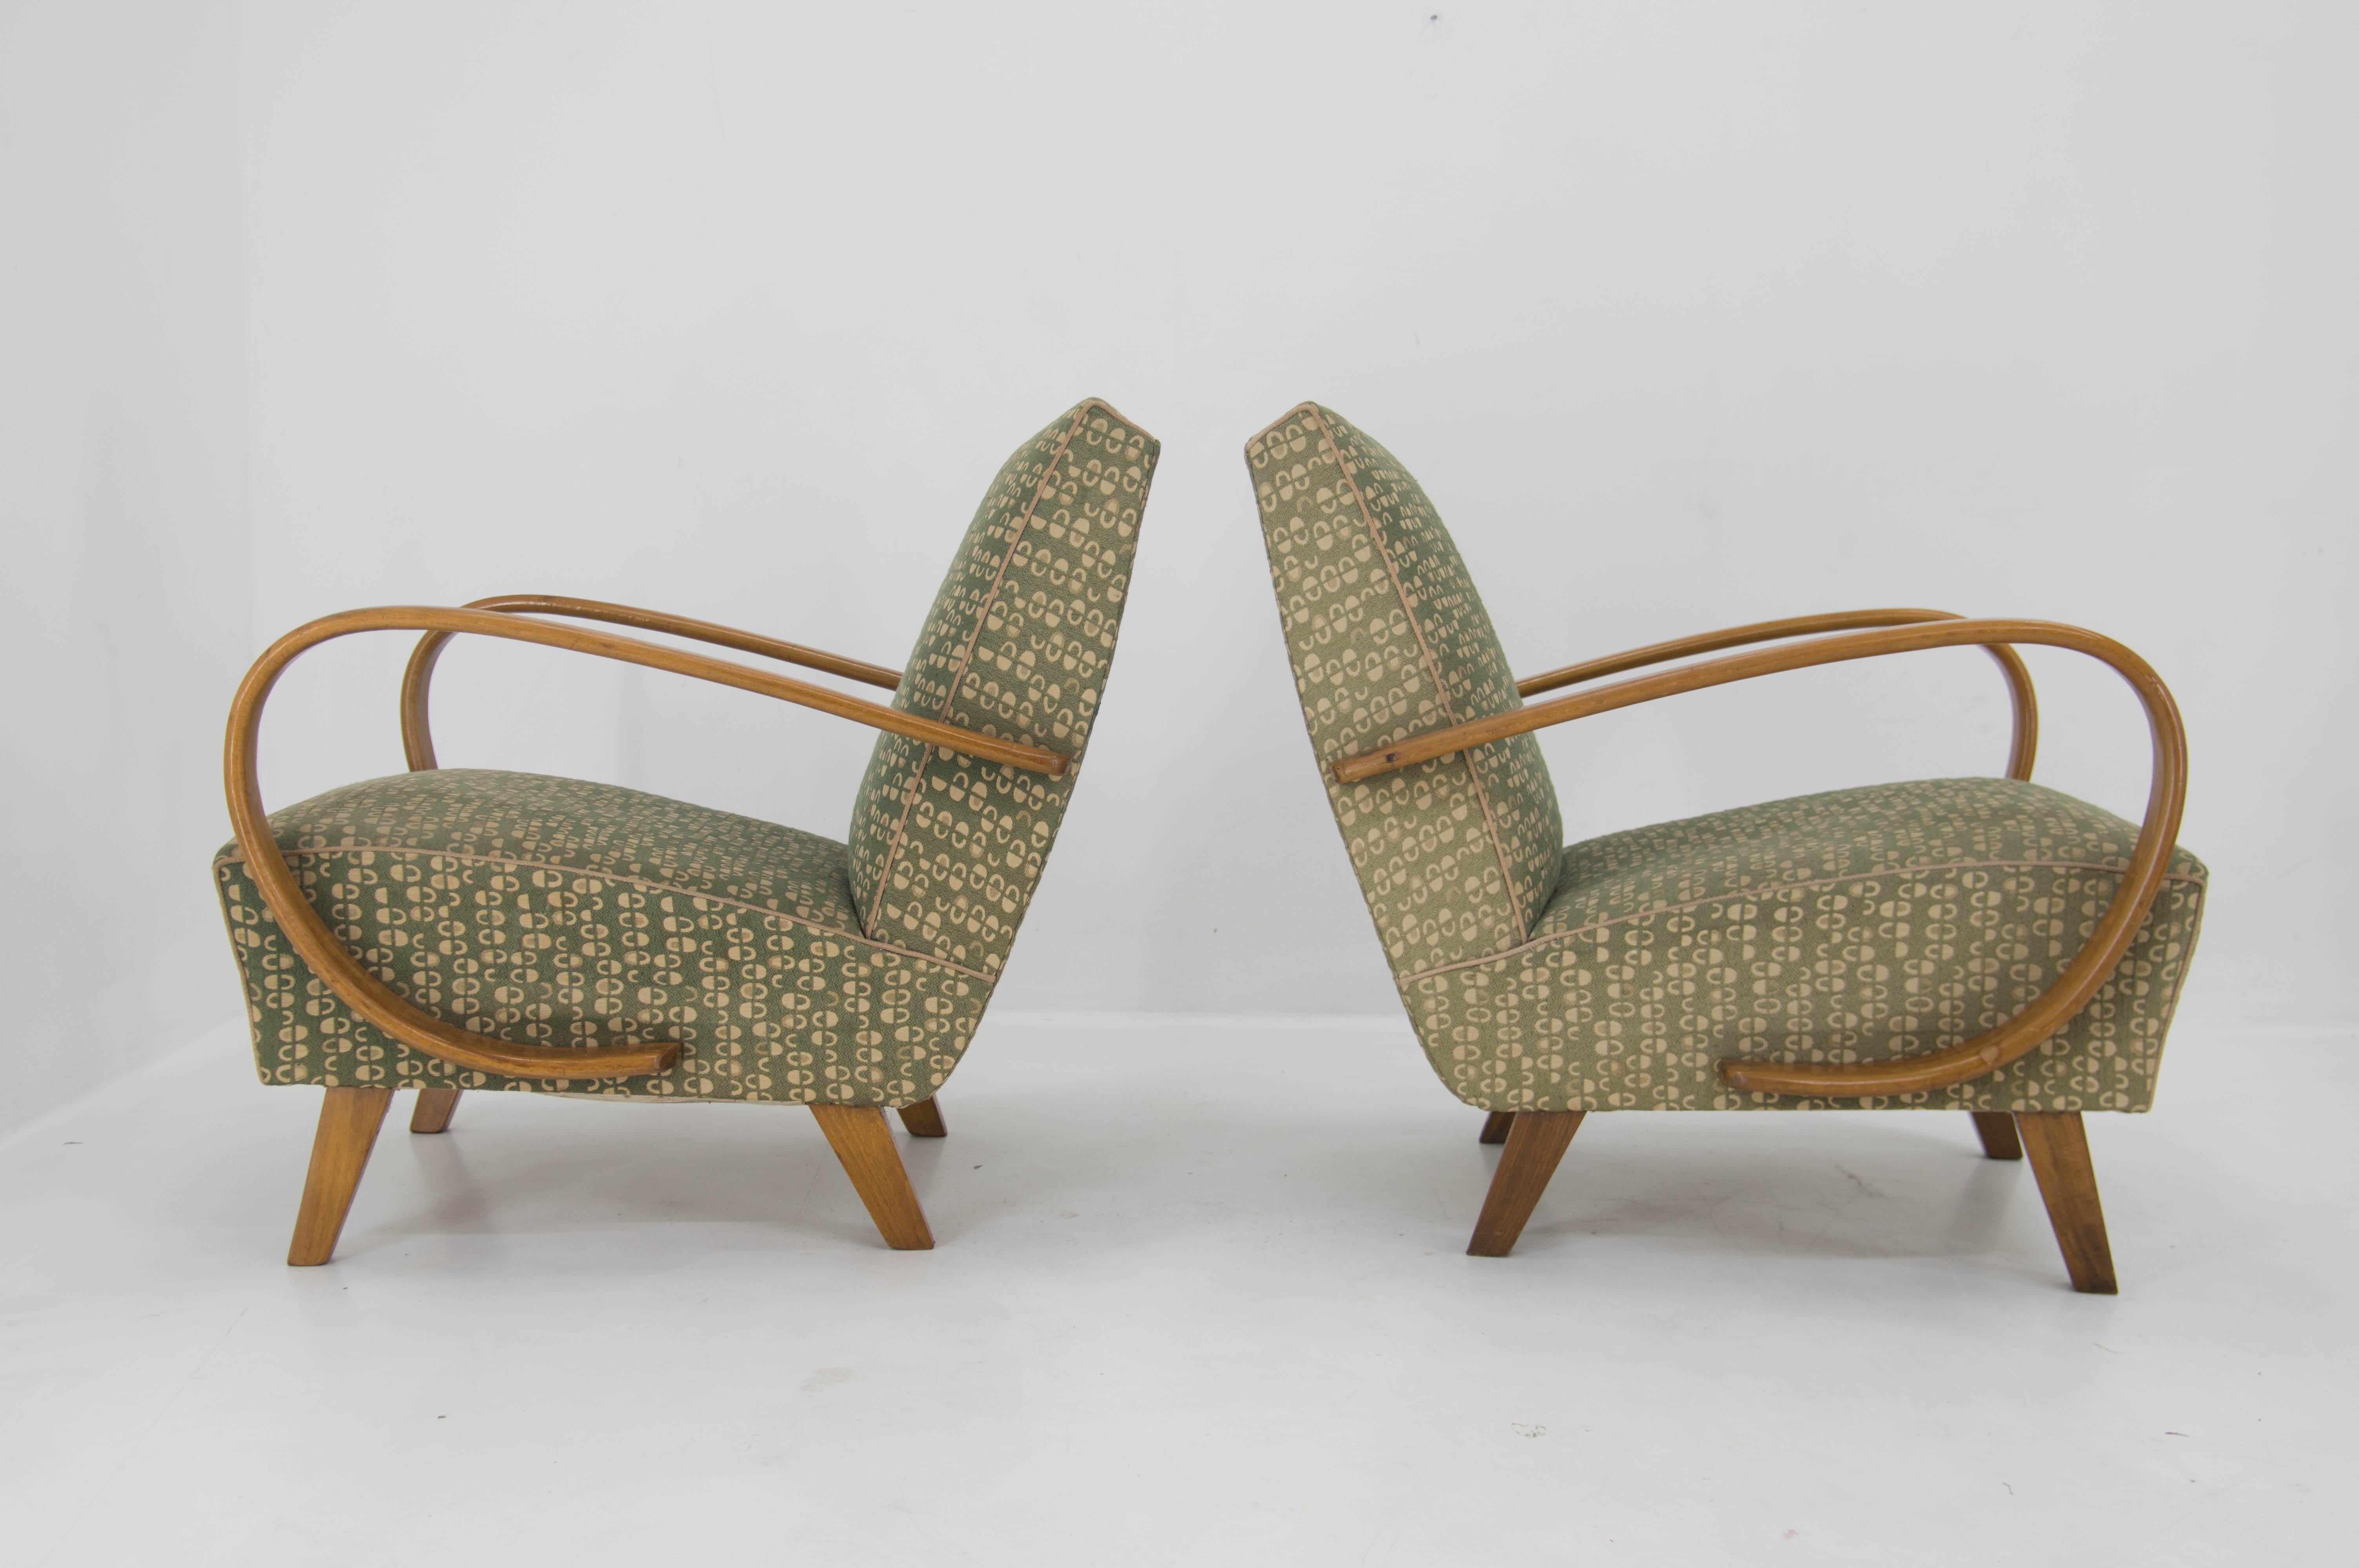 Extremely well-preserved pair of Halabala's armchairs!
Original upholstery in very good condition.
Inner filling in very good condition - very comfortable seating
A great choice for those who want to sit on the real original Halabala.